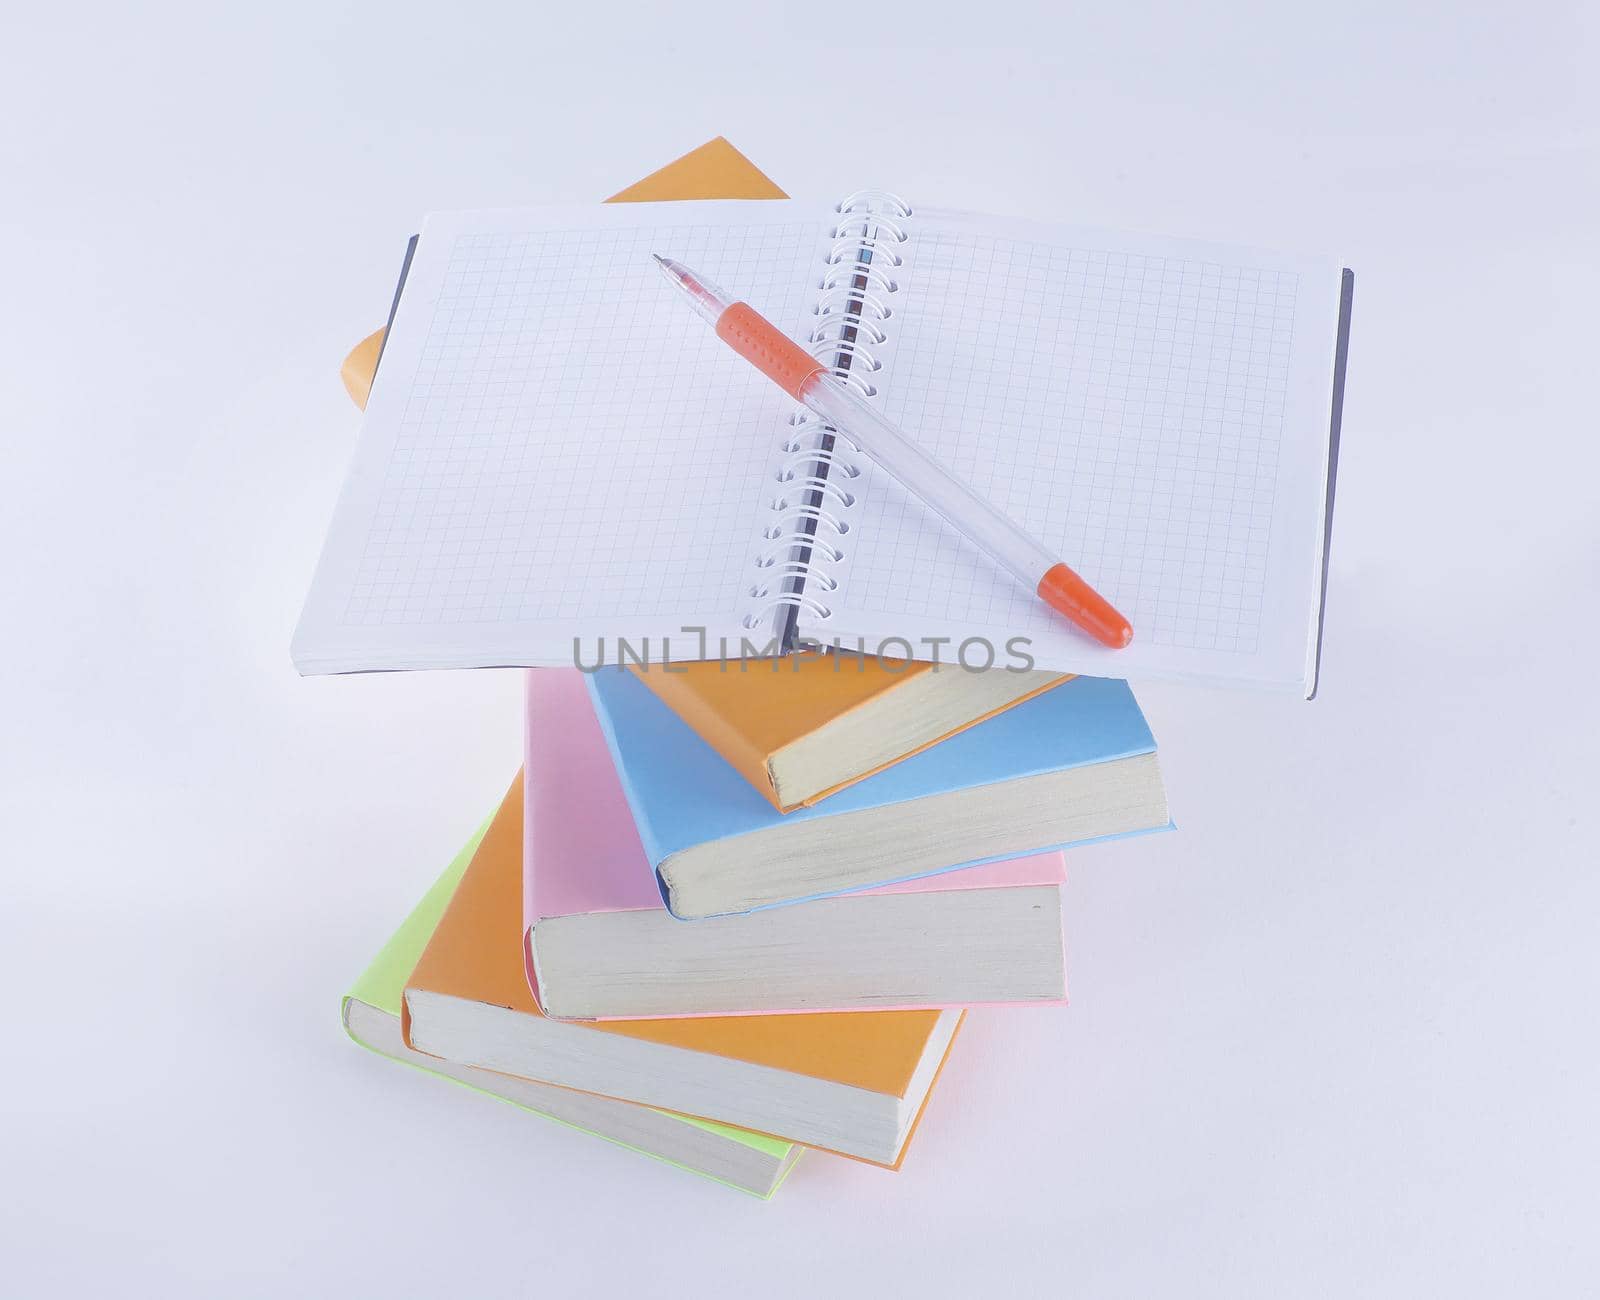 open the notebook, pen and a stack of books on white background.